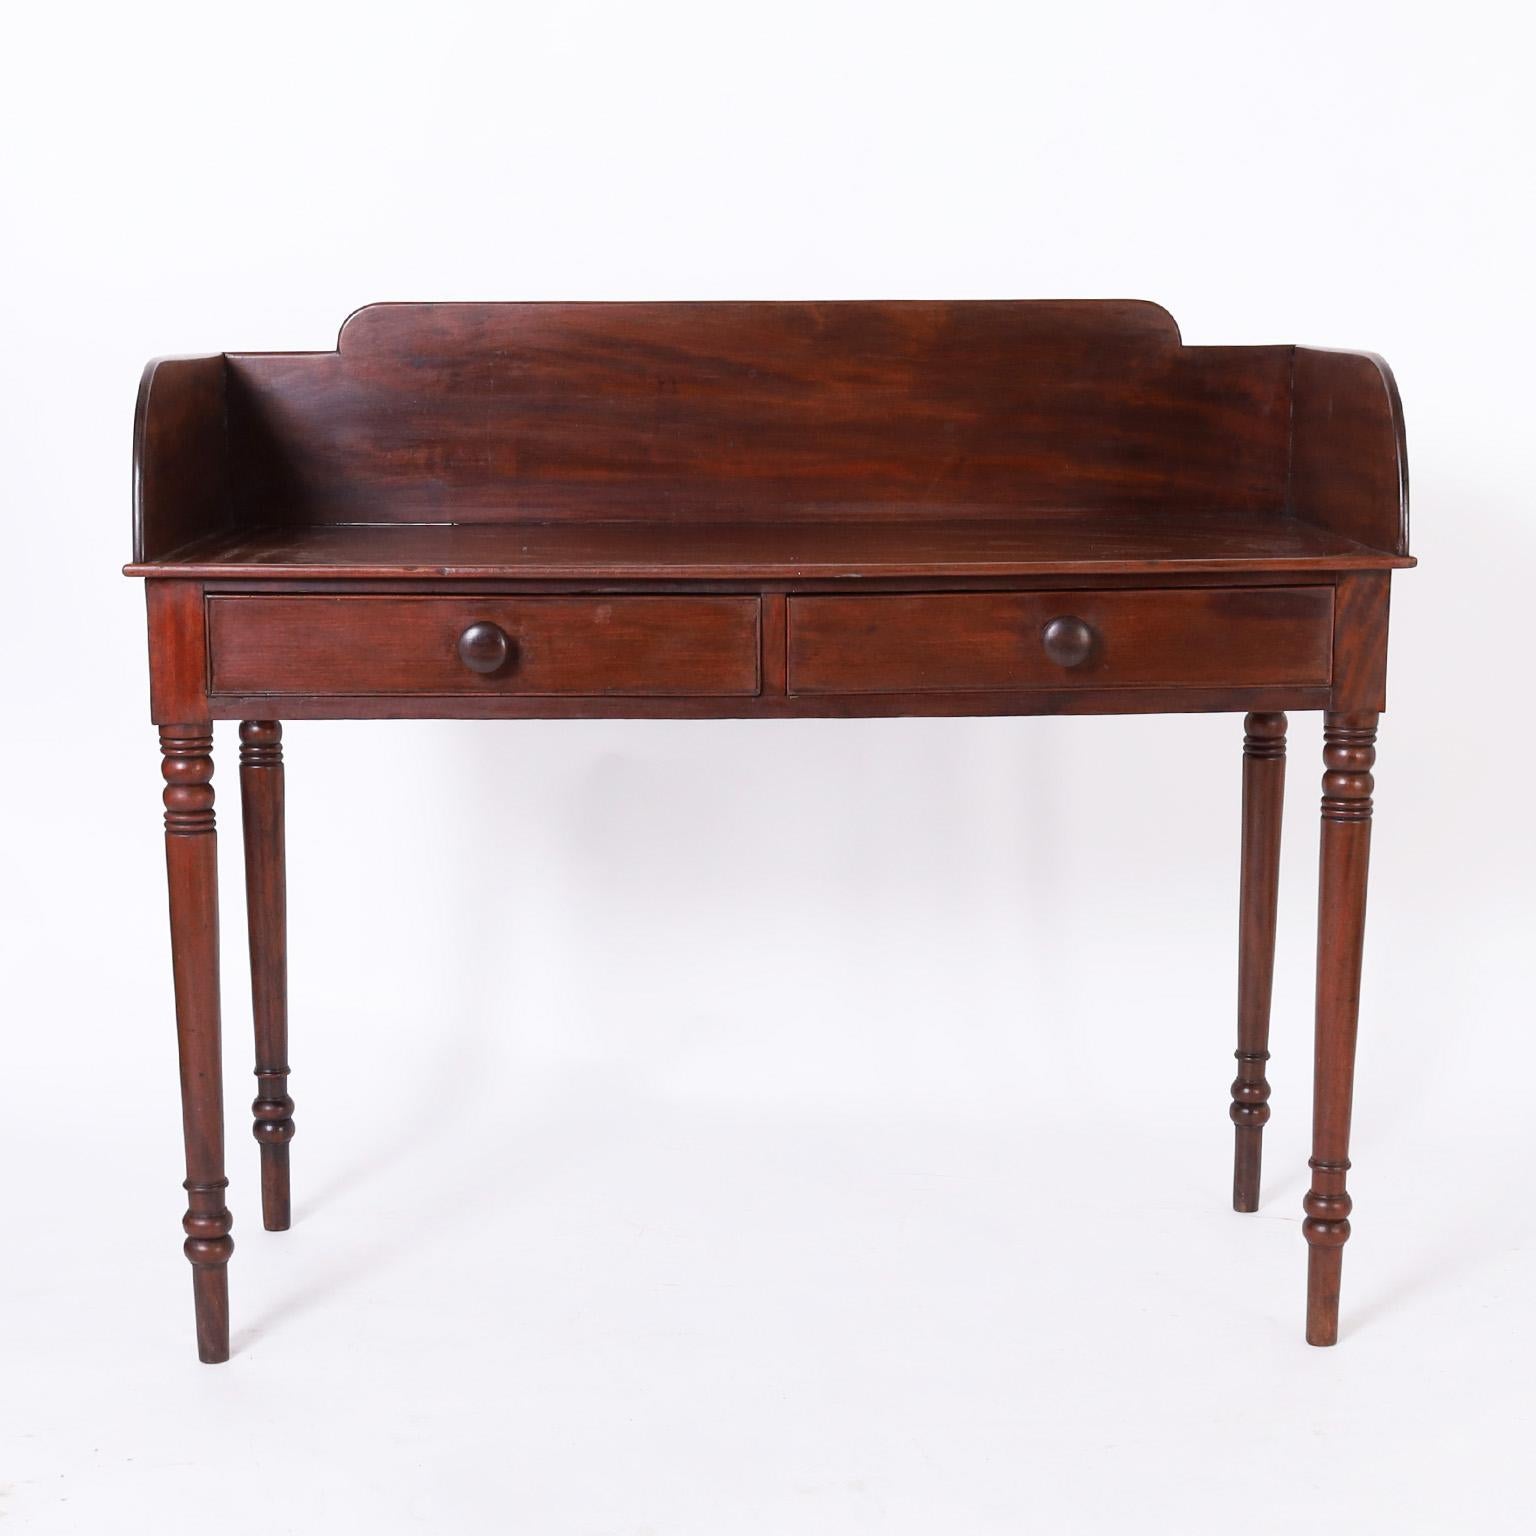 Rare and remarkable early 19th century server or bar handcrafted in mahogany with a dark lush finish having a gallery around the top, two drawers, and long elegant turned legs.